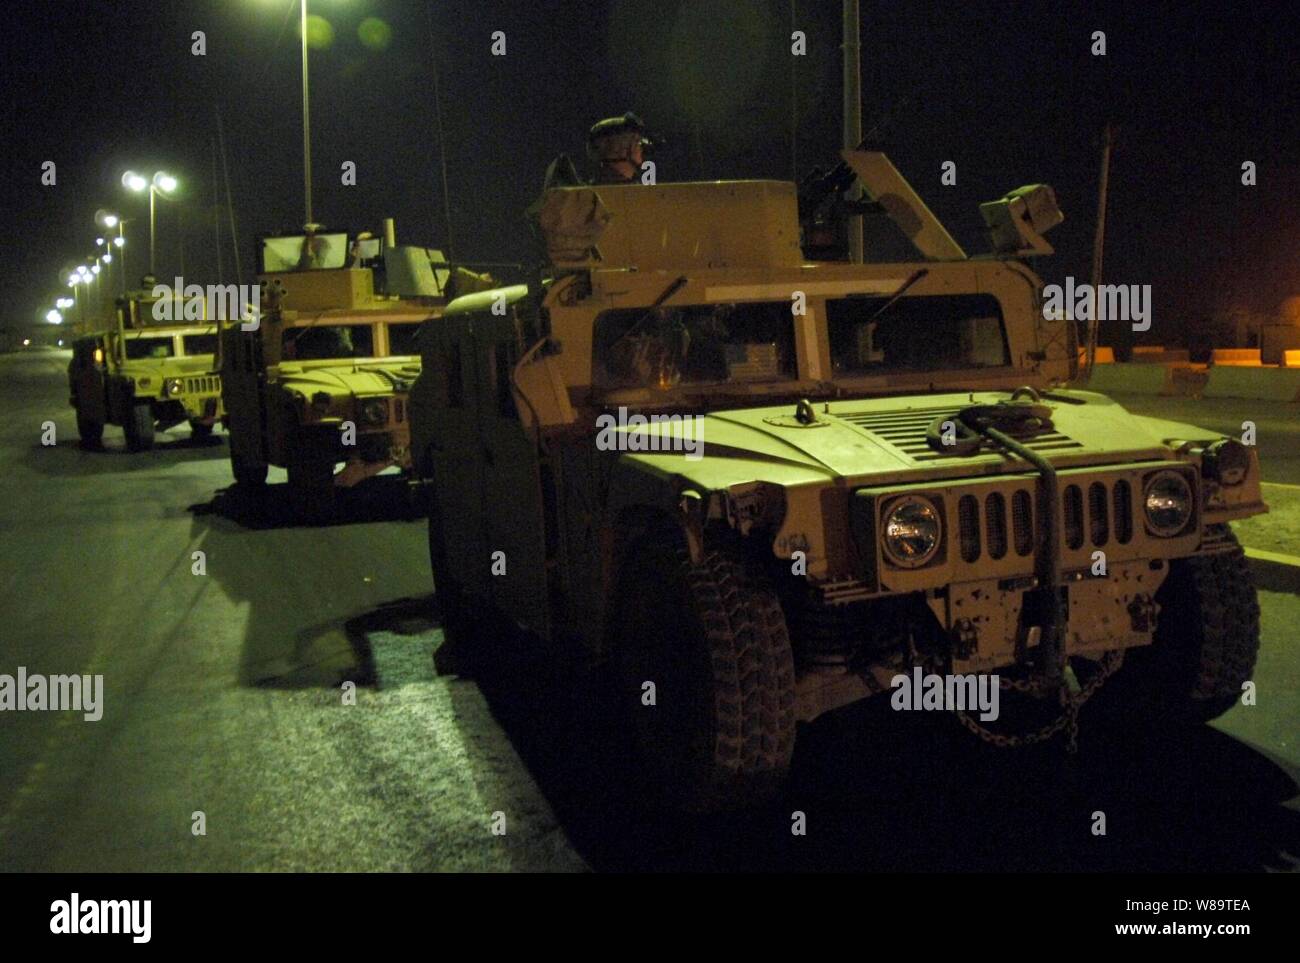 U.S. Army soldiers with the 4th Battalion, 320th Field Artillery, 506th Regimental Combat Team, 101st Airborne Division conduct a night patrol in the Zafaraniya District of East Baghdad, Iraq, on Aug. 13, 2006. Stock Photo